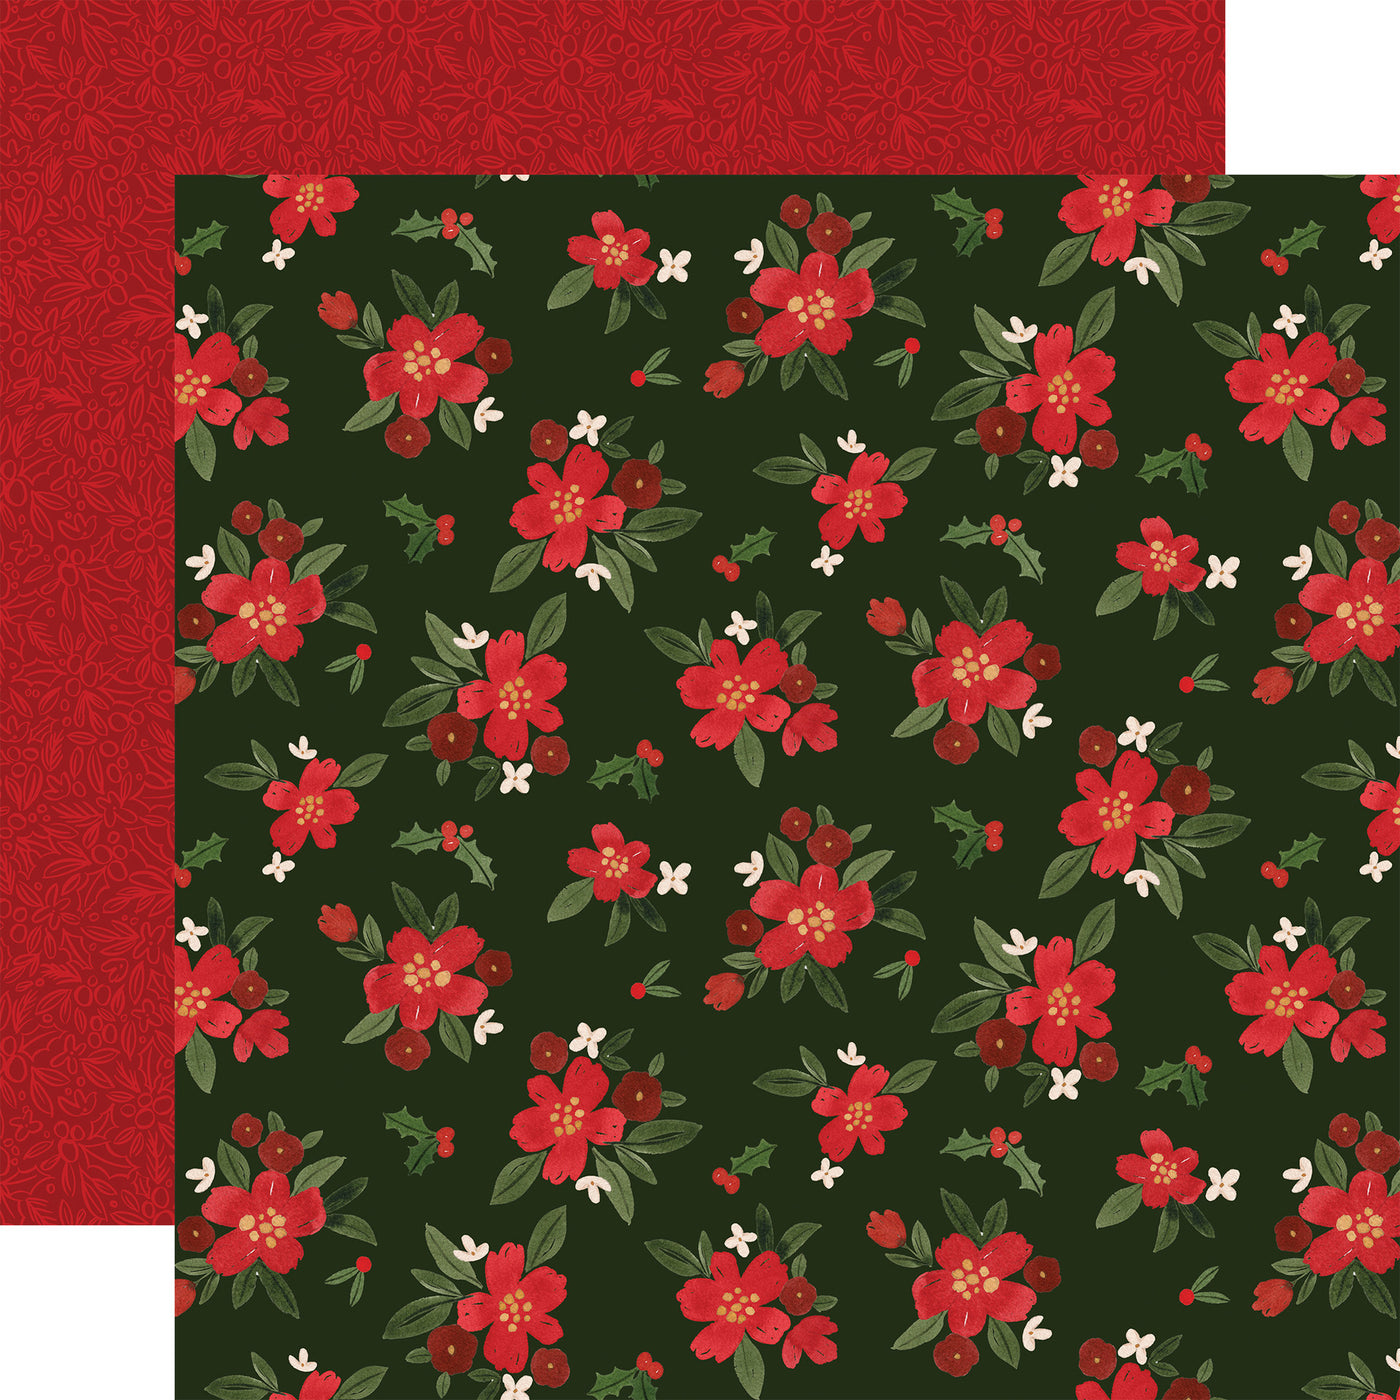 A Christmas florals over a black background. The reverse is a red background with a red floral pattern. 